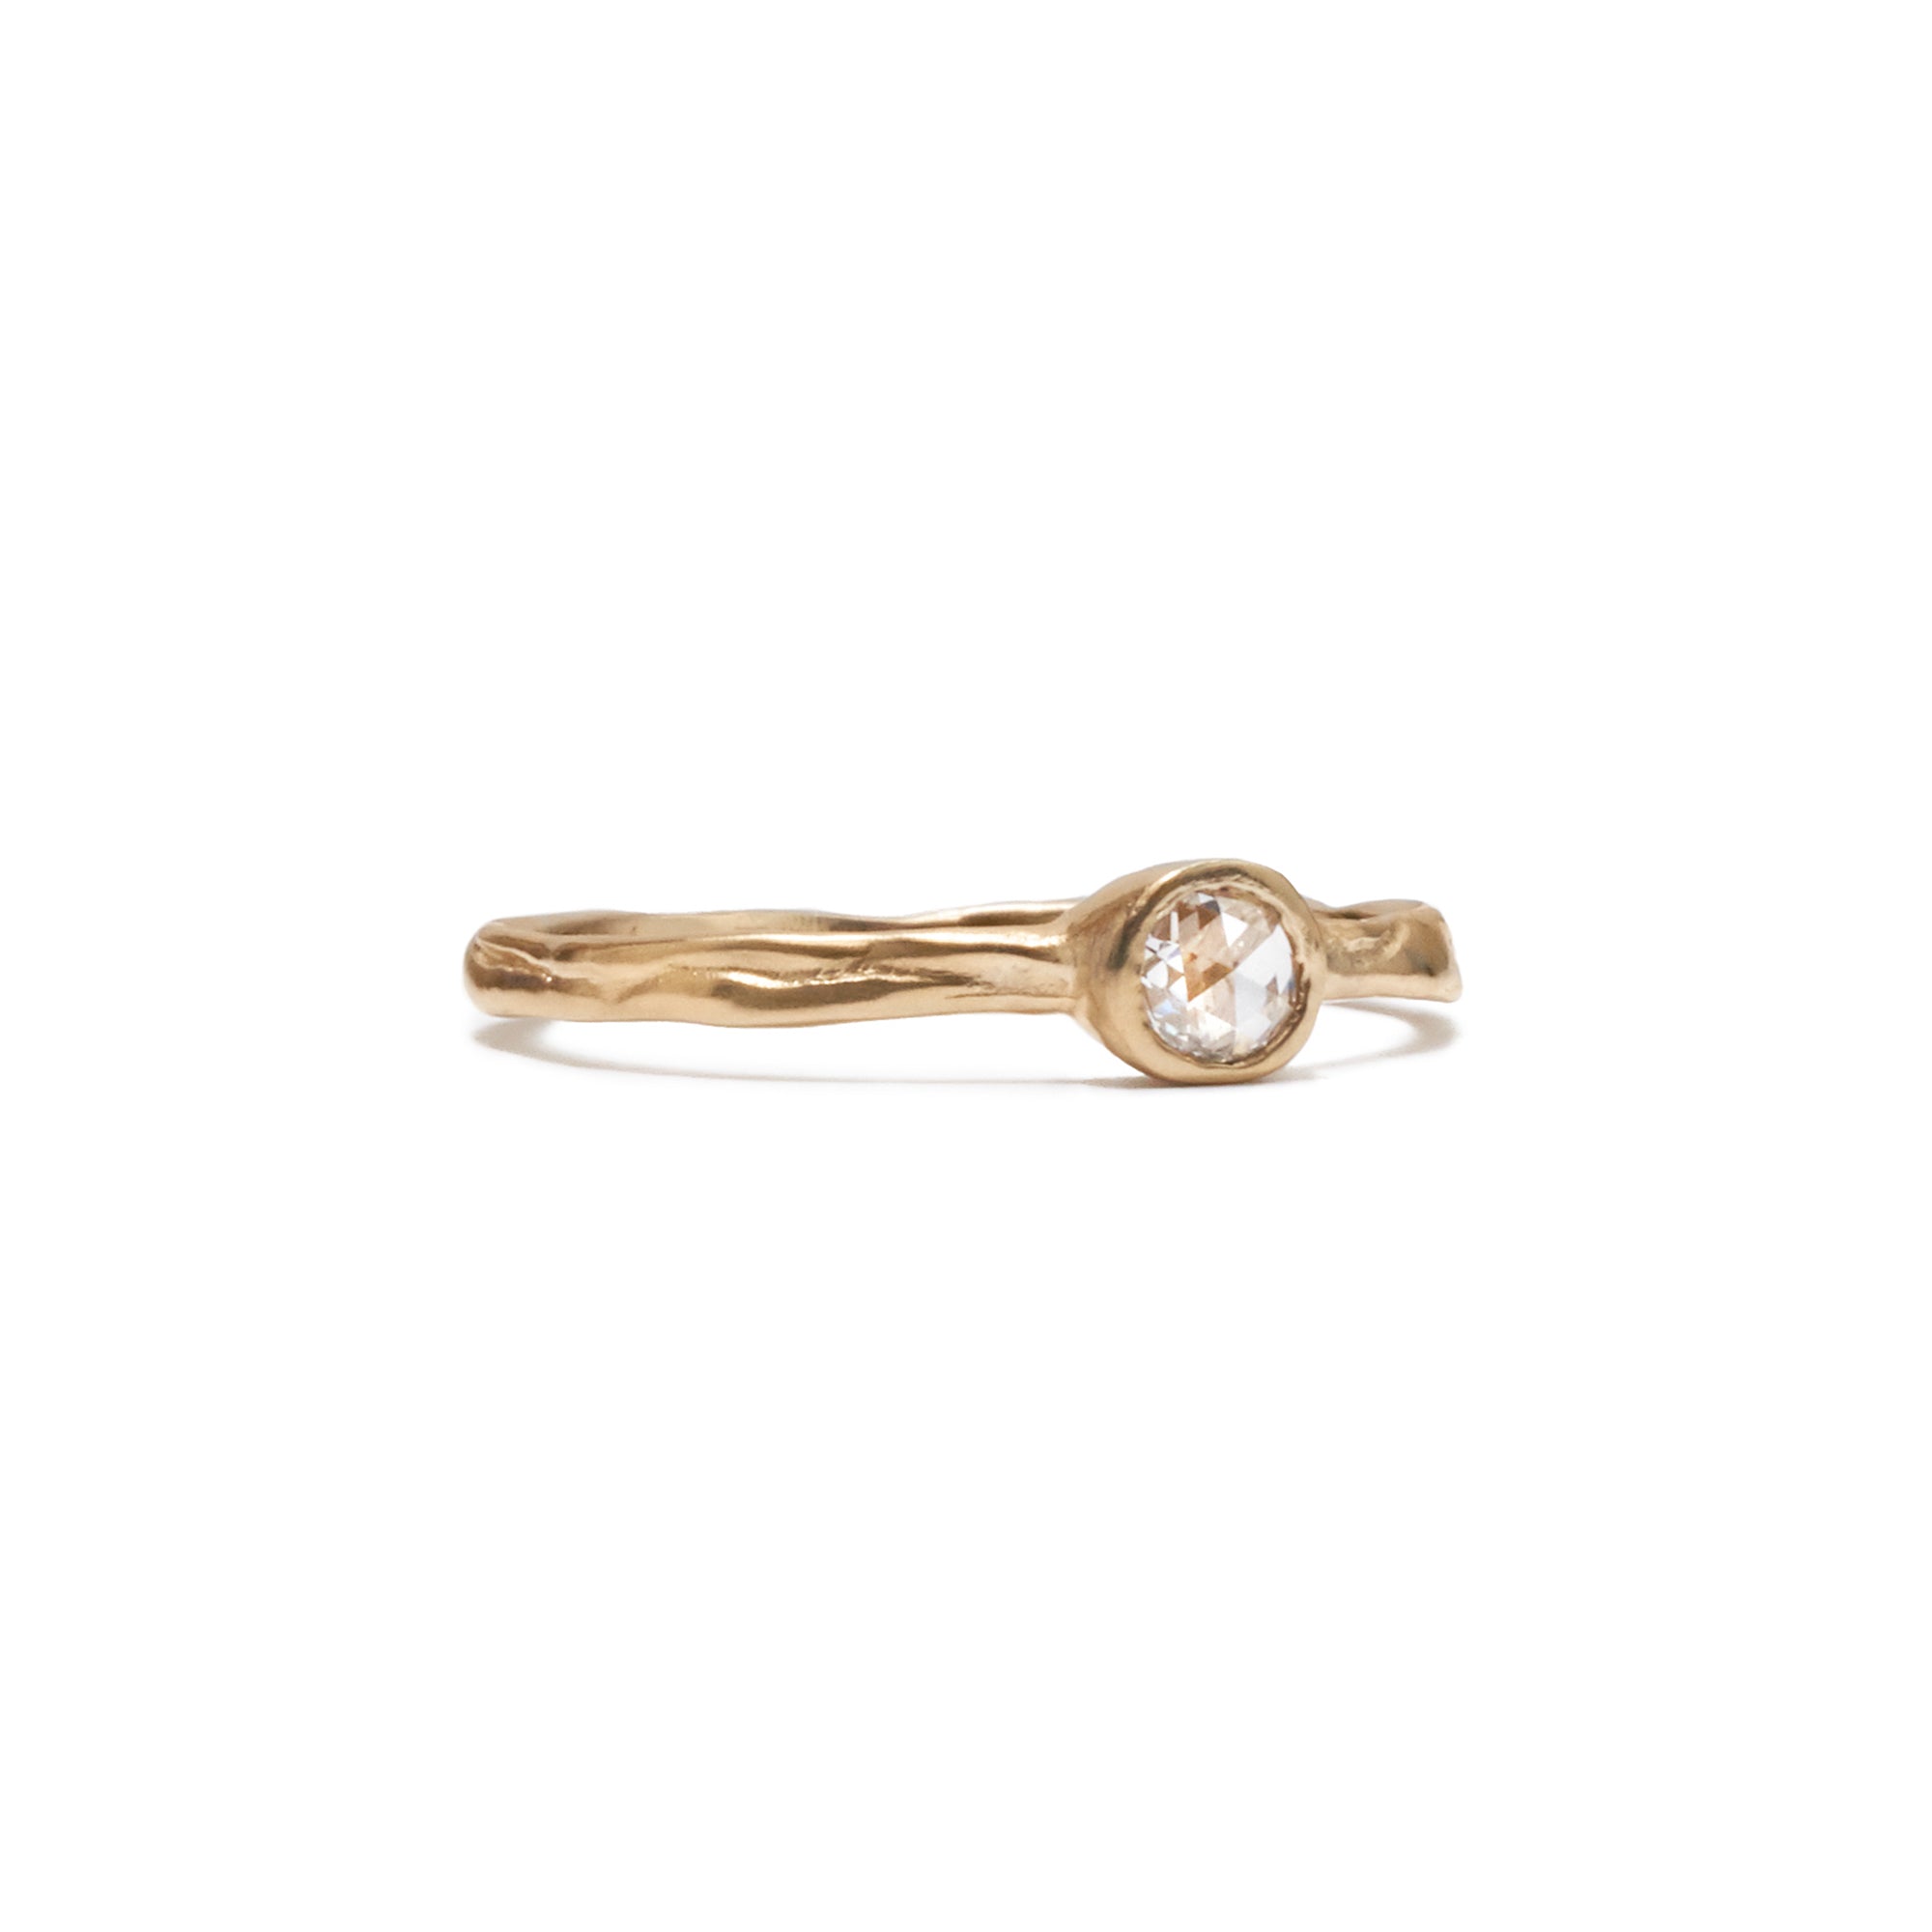 The Cusp diamond solitaire in 14k gold is the perfect way to commemorate an engagement or special occasion. 